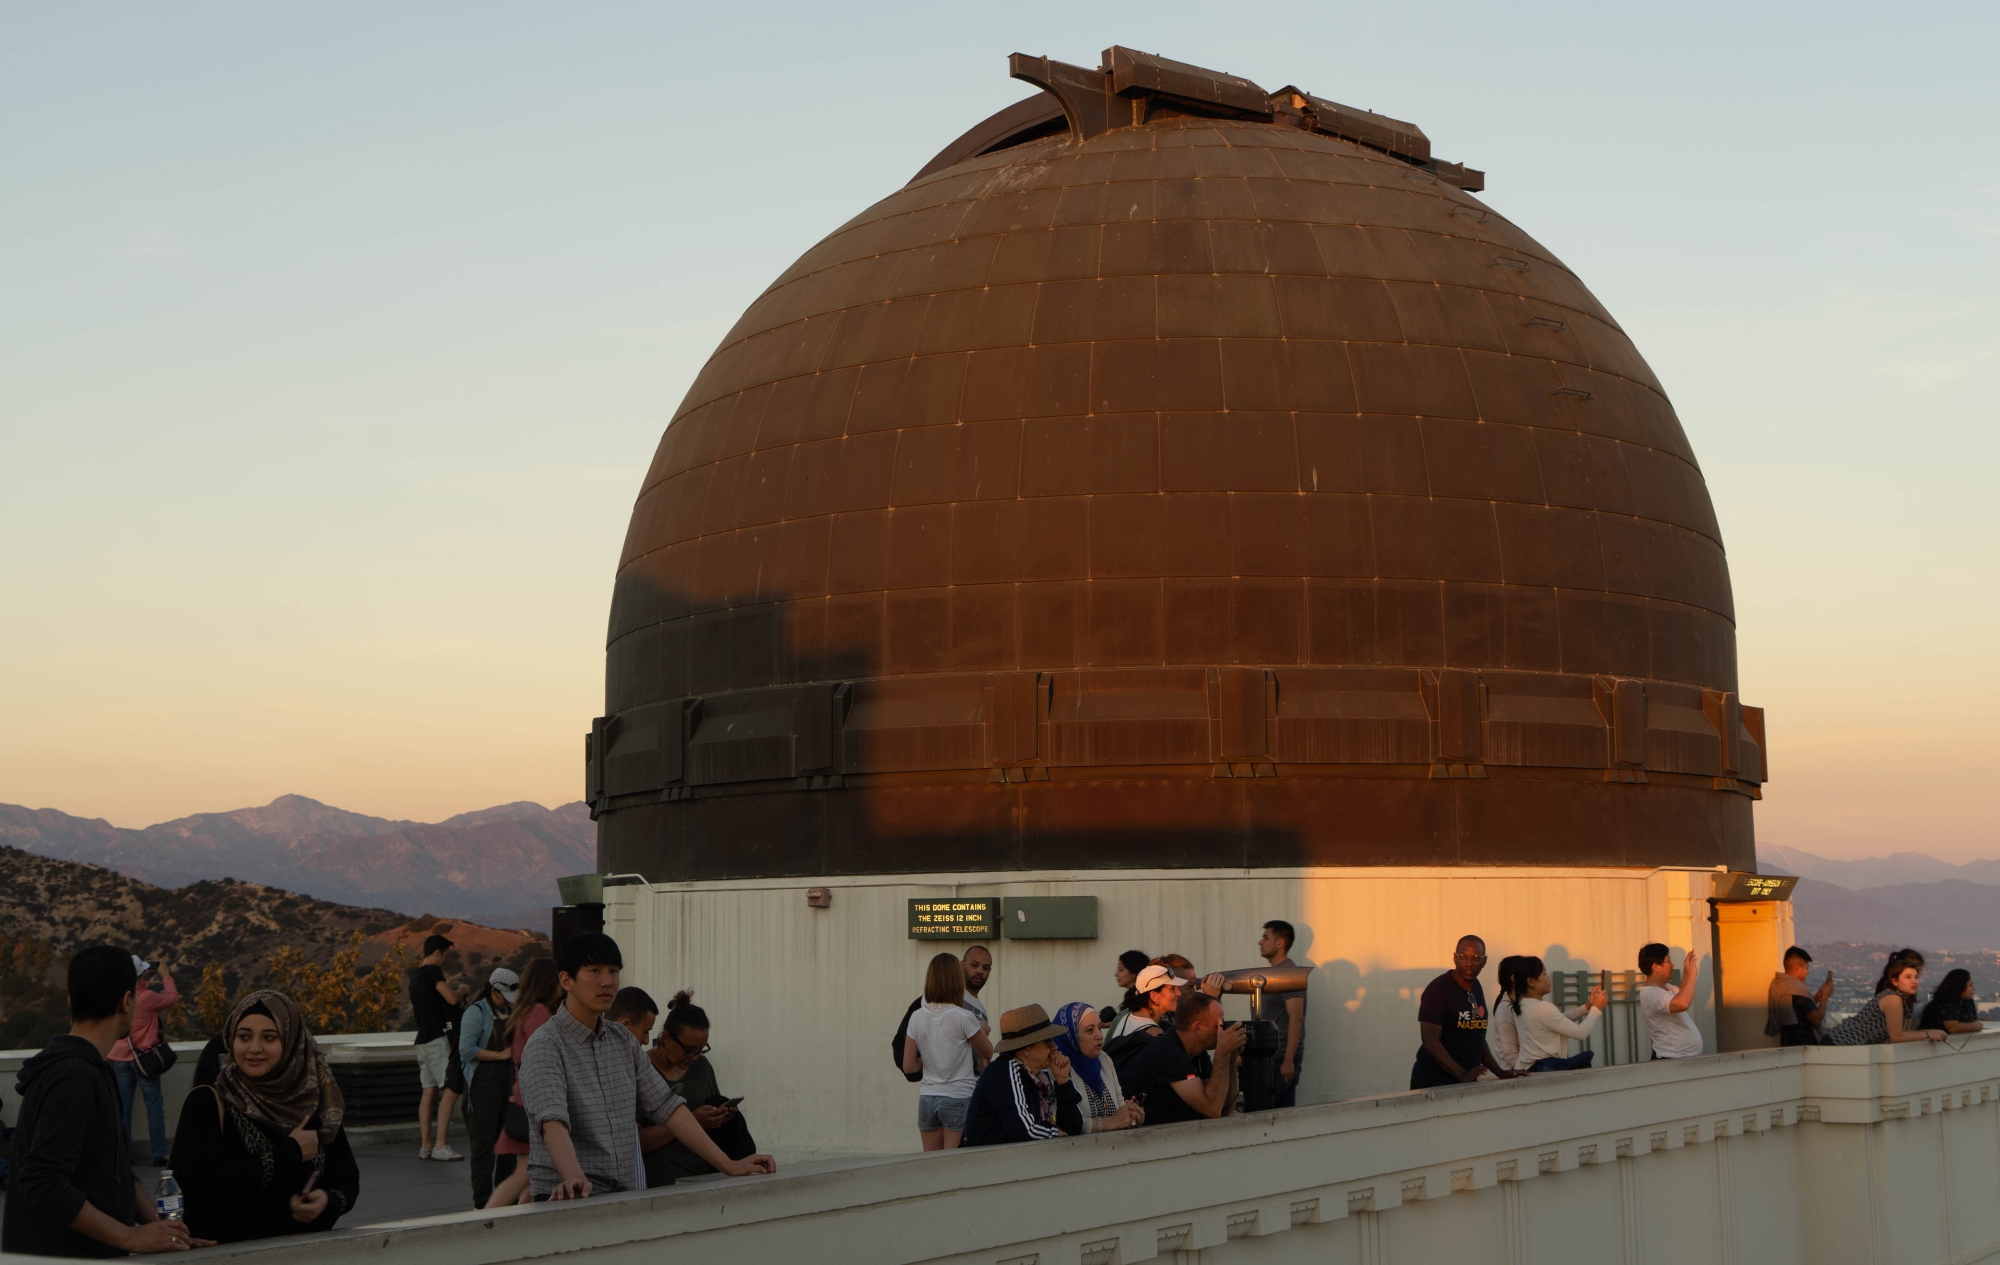 visitar o Griffith Observatory